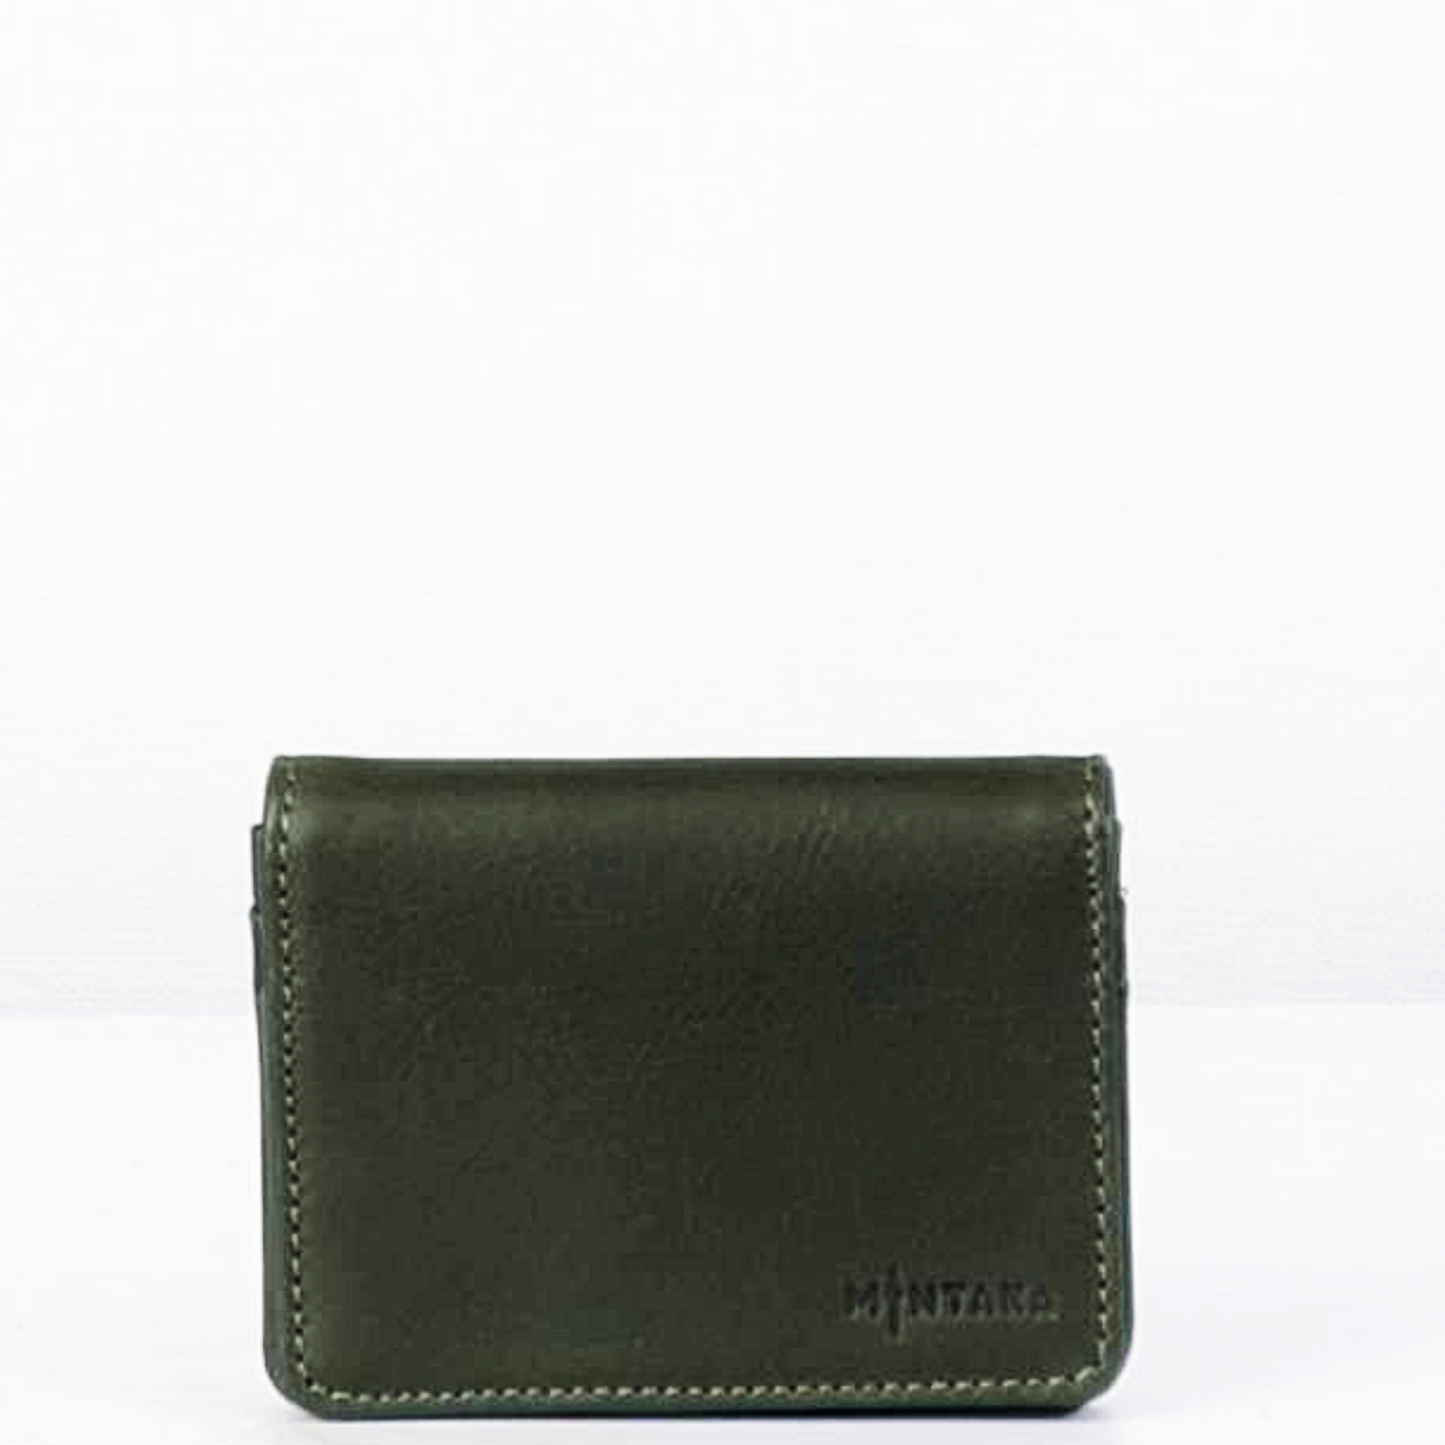 Anna Leather Business Card Wallet